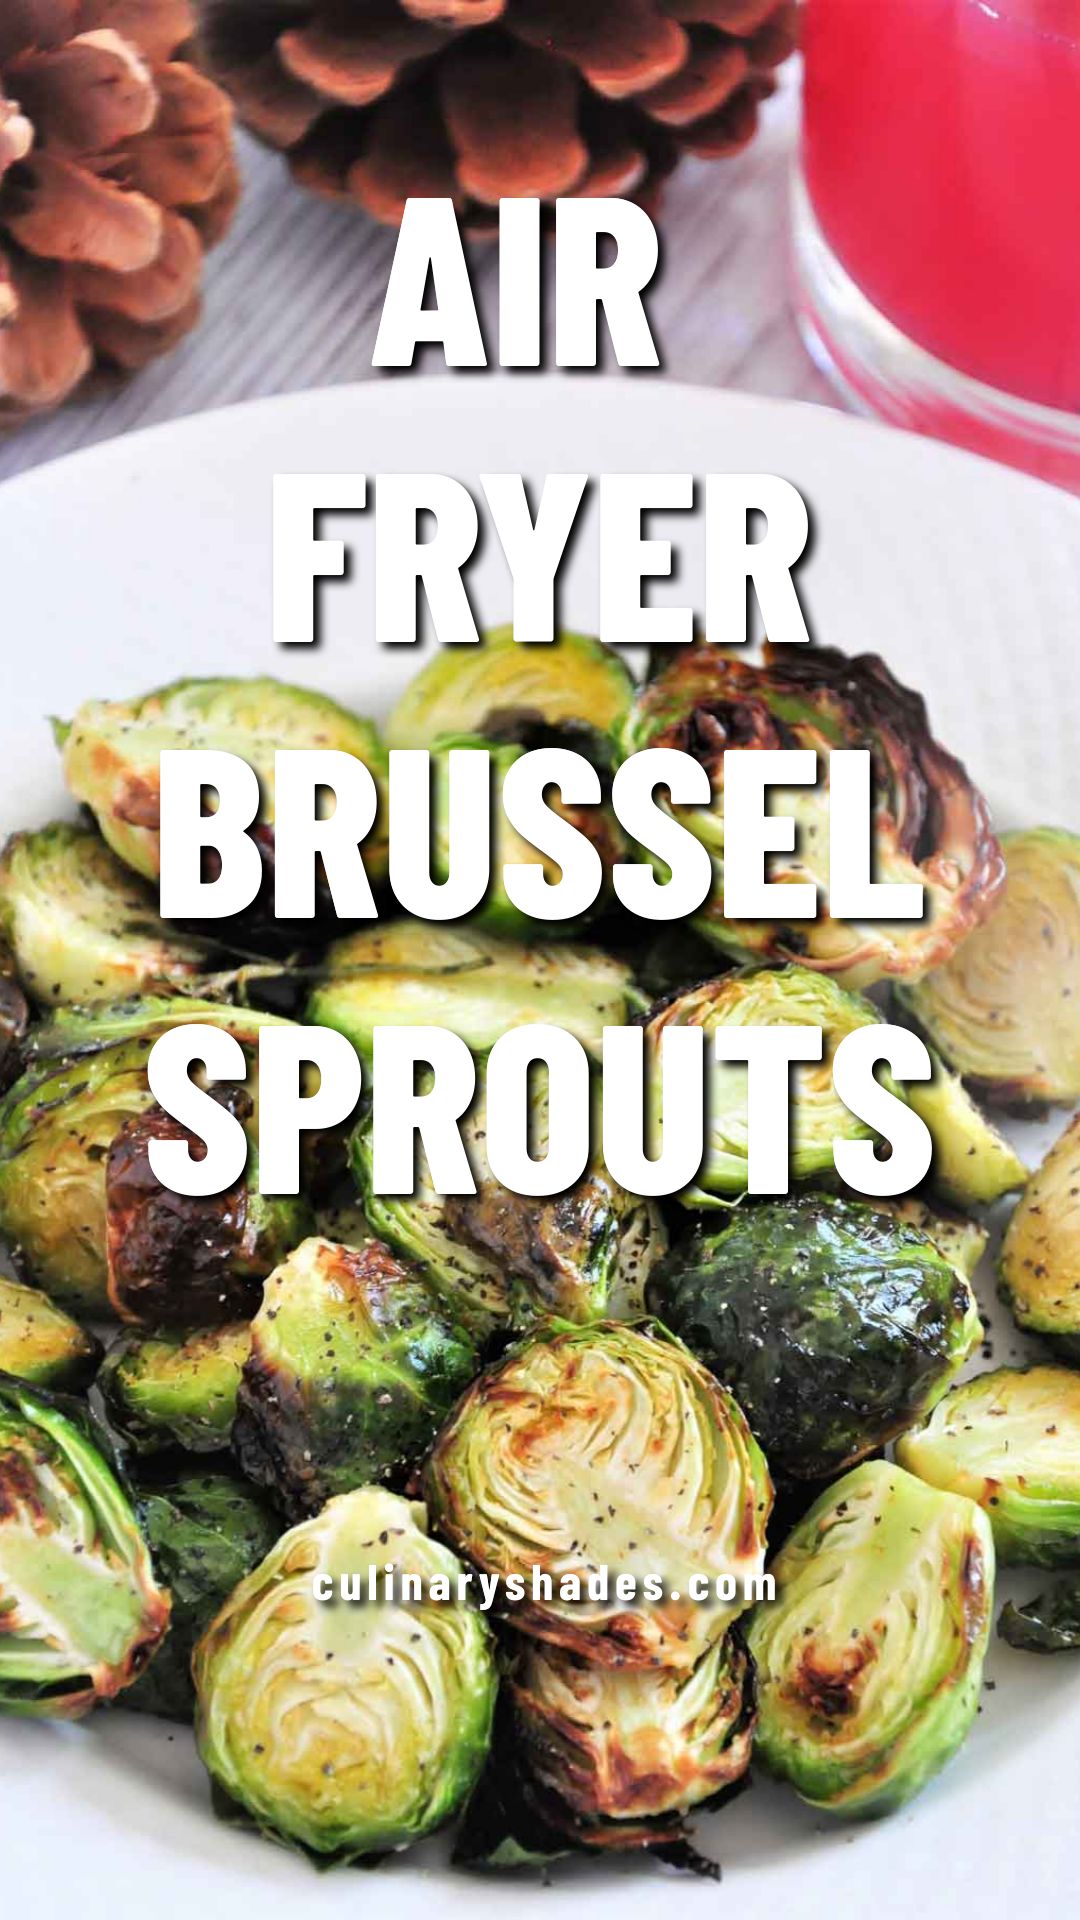 roasted brussel sprouts in a plate.